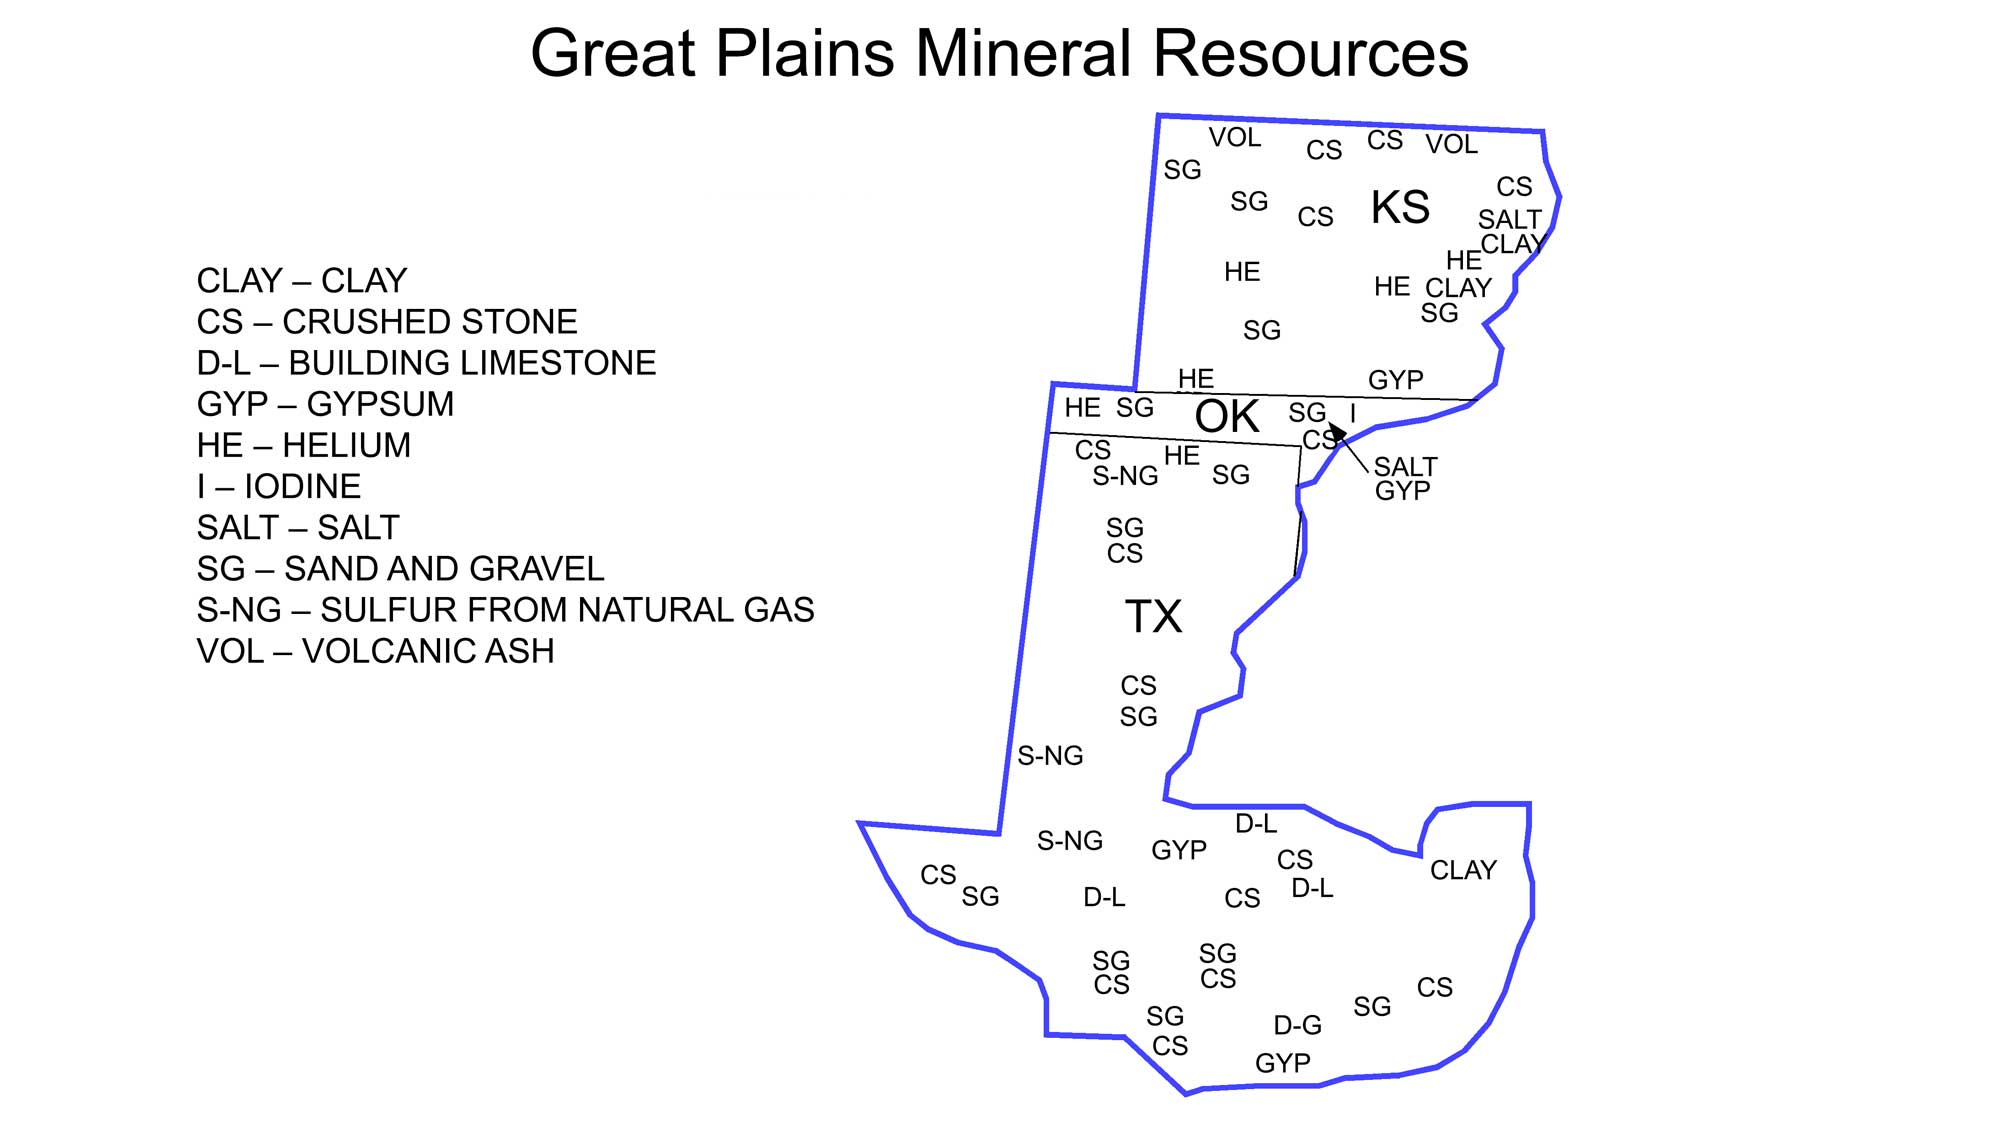 Map showing the locations of different types of mineral resources in the Great Plains region of the South-Central United States.